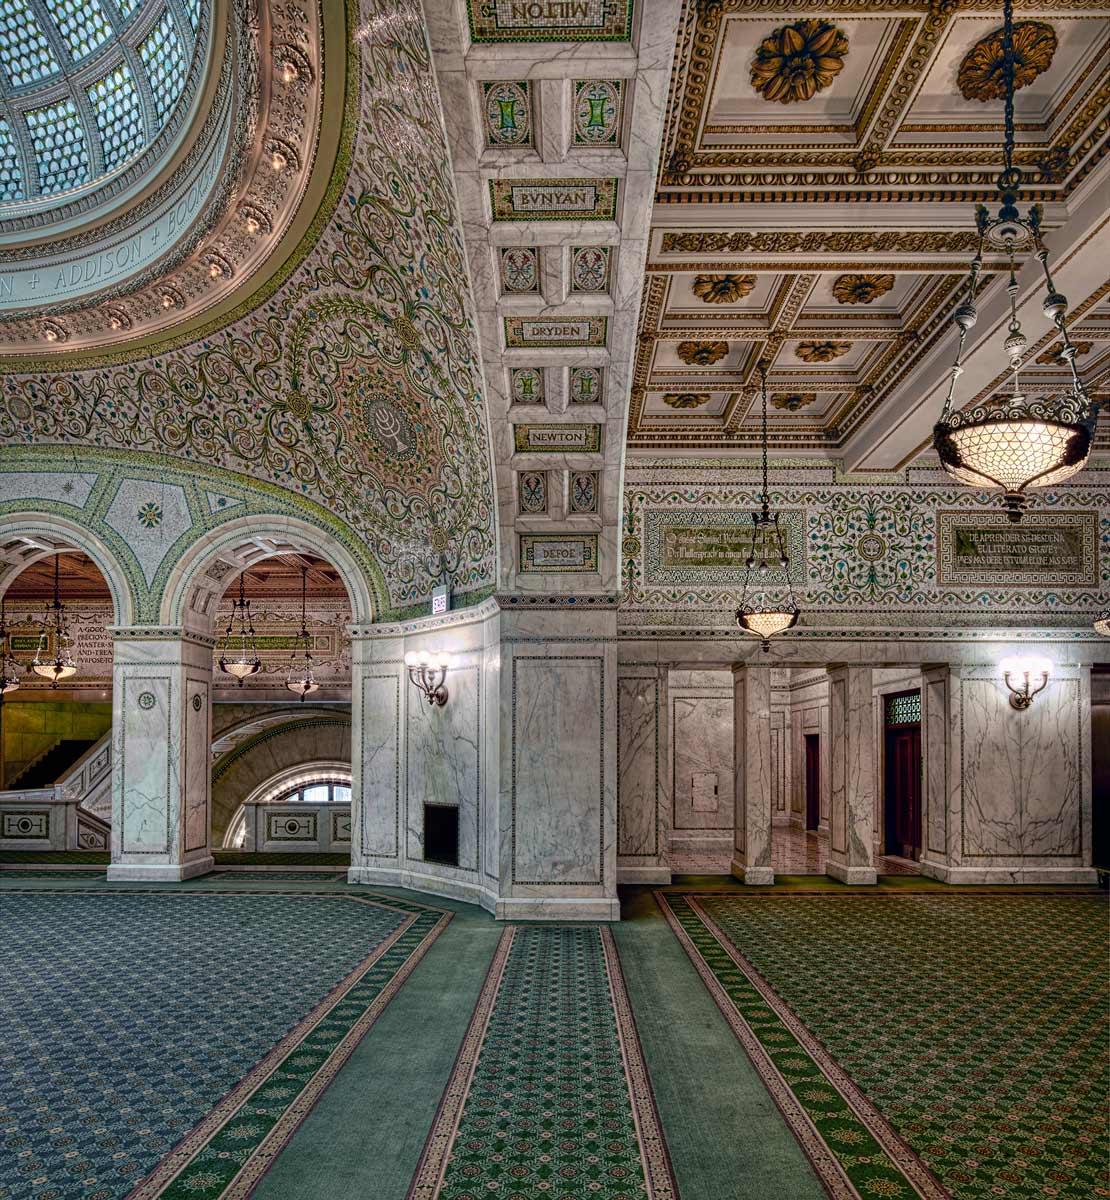 The Chicago Cultural Center - 1897 -  Shepley, Rutan and Coolidge - Chicago